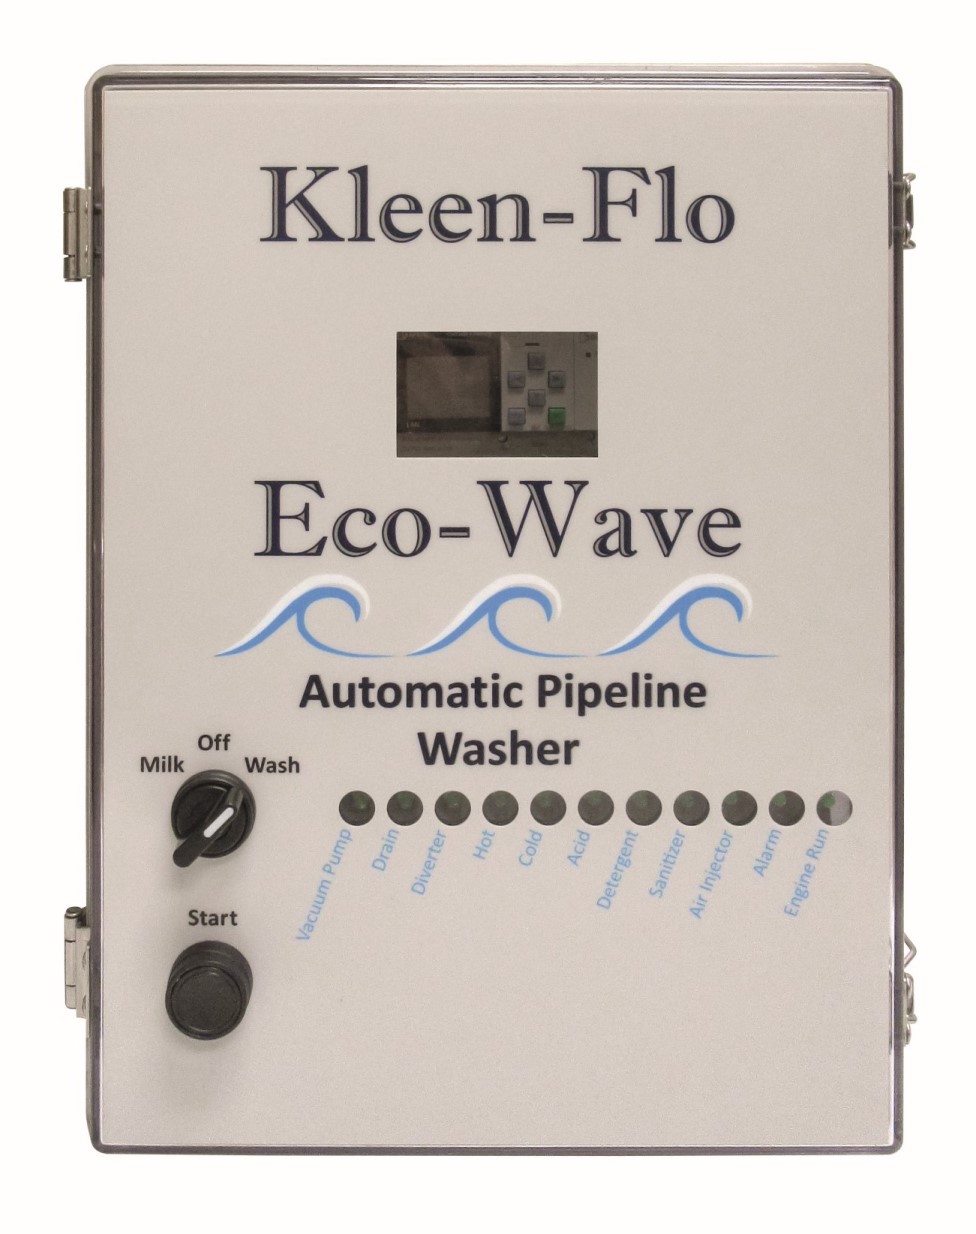 Kleen-Flo Eco-Wave 100-240V Automatic Pipeline Washer